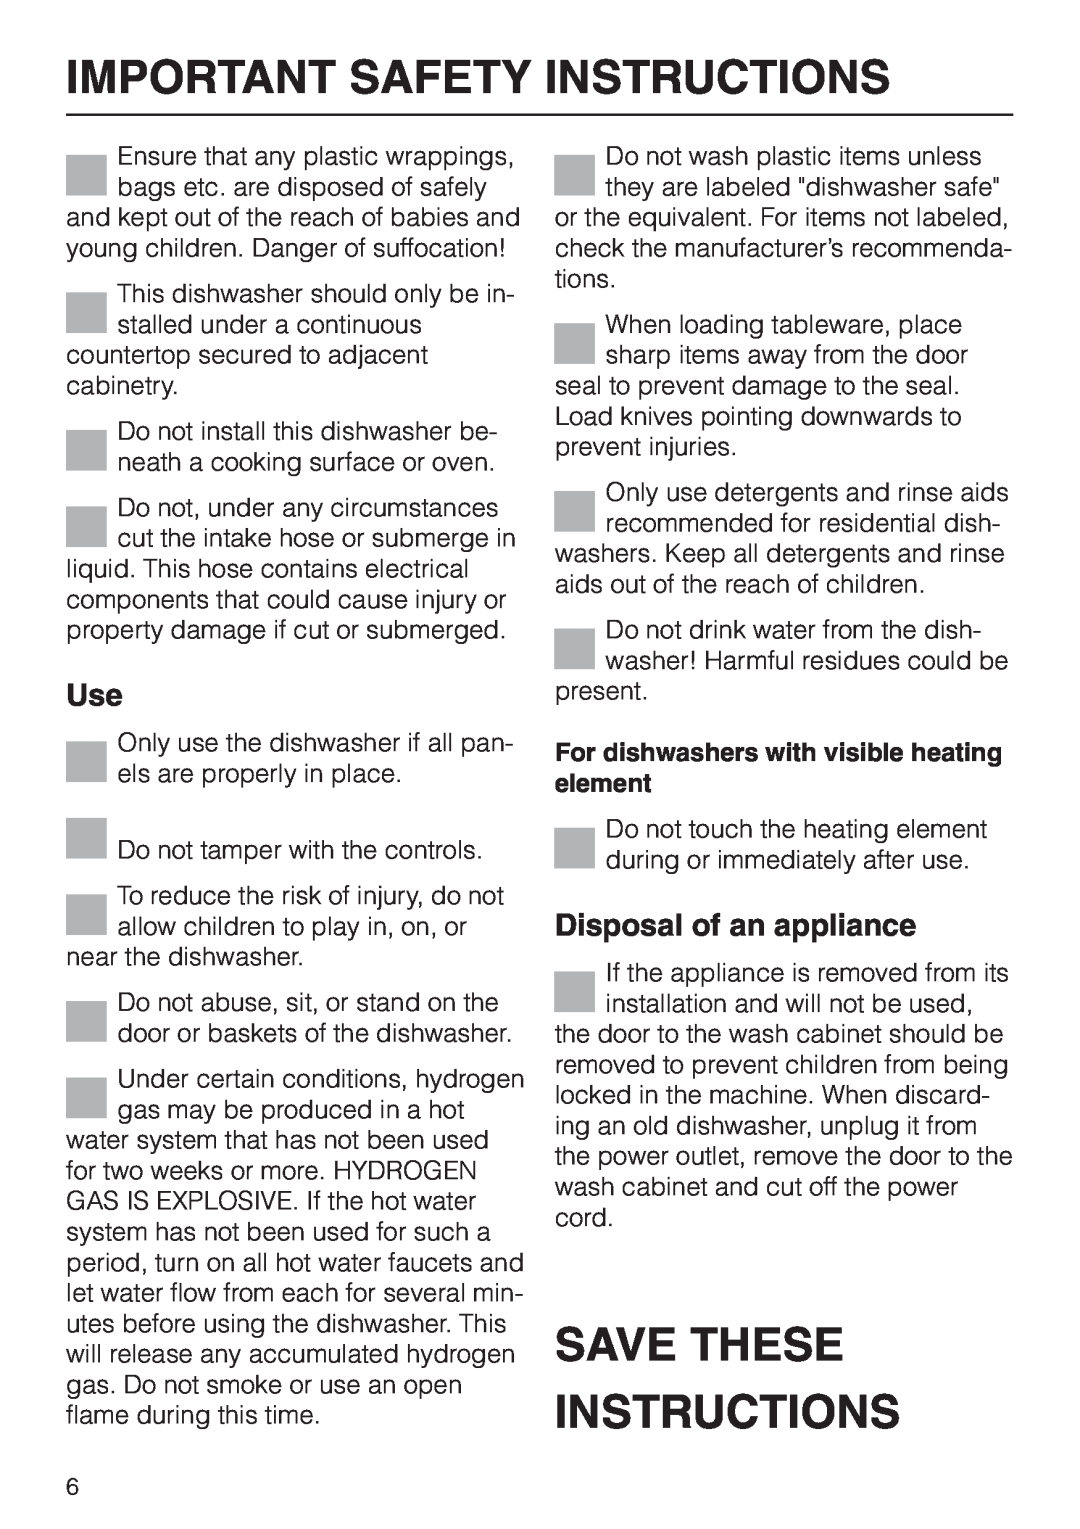 Miele G858SCVI, G658SCVI manual Save These Instructions, Disposal of an appliance, Important Safety Instructions 